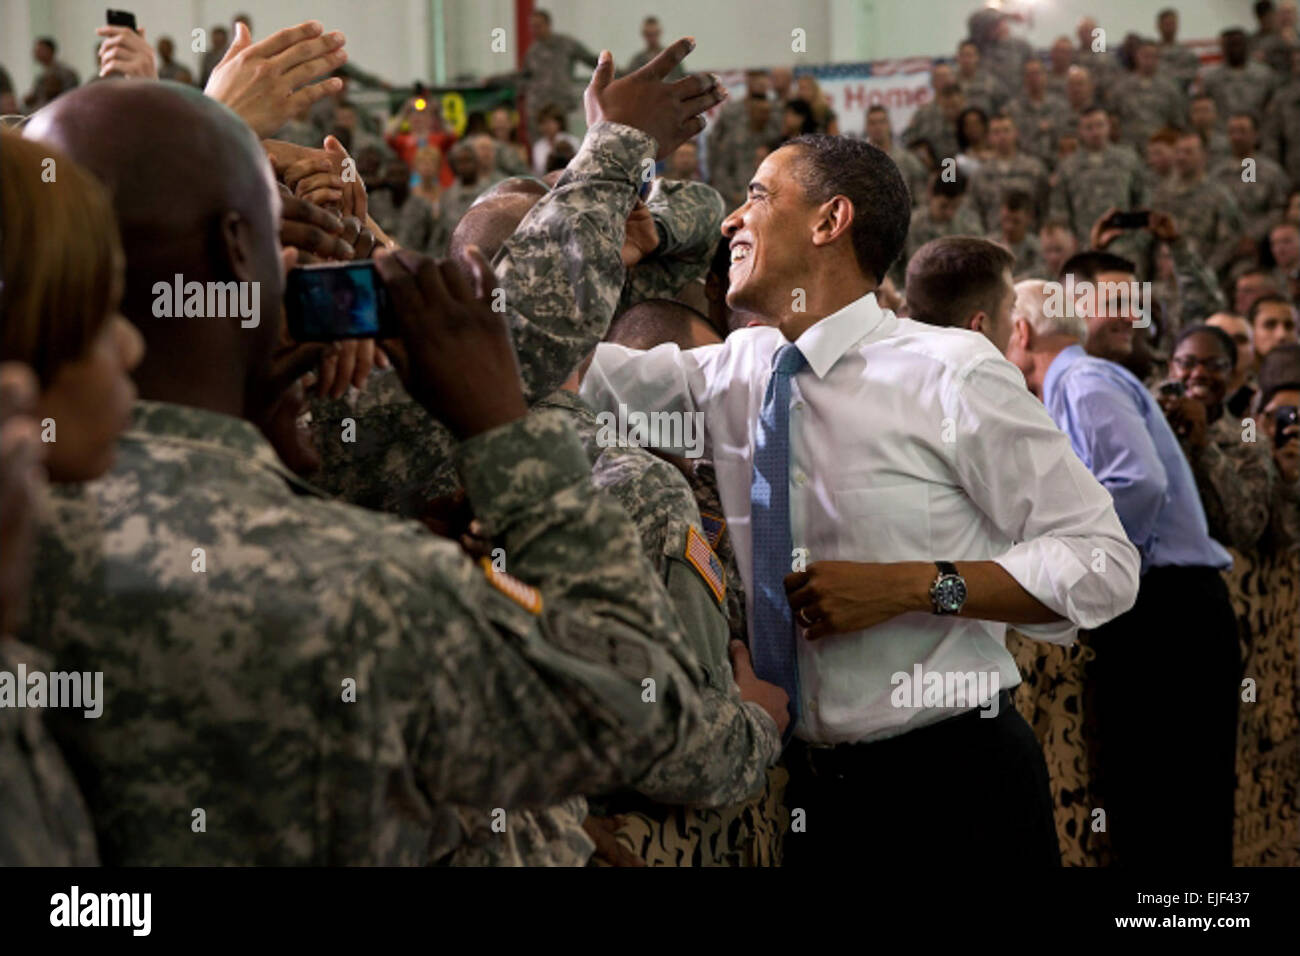 President Barack Obama and Vice President Joe Biden shake hands with the troops following the president's remarks at Fort Campbell, Ky., May 6, 2011. The skill and courage of countless American military and intelligence professionals is why Osama bin Laden can never threaten America again, Obama told the cheering group of 101st Airborne Division soldiers. Stock Photo